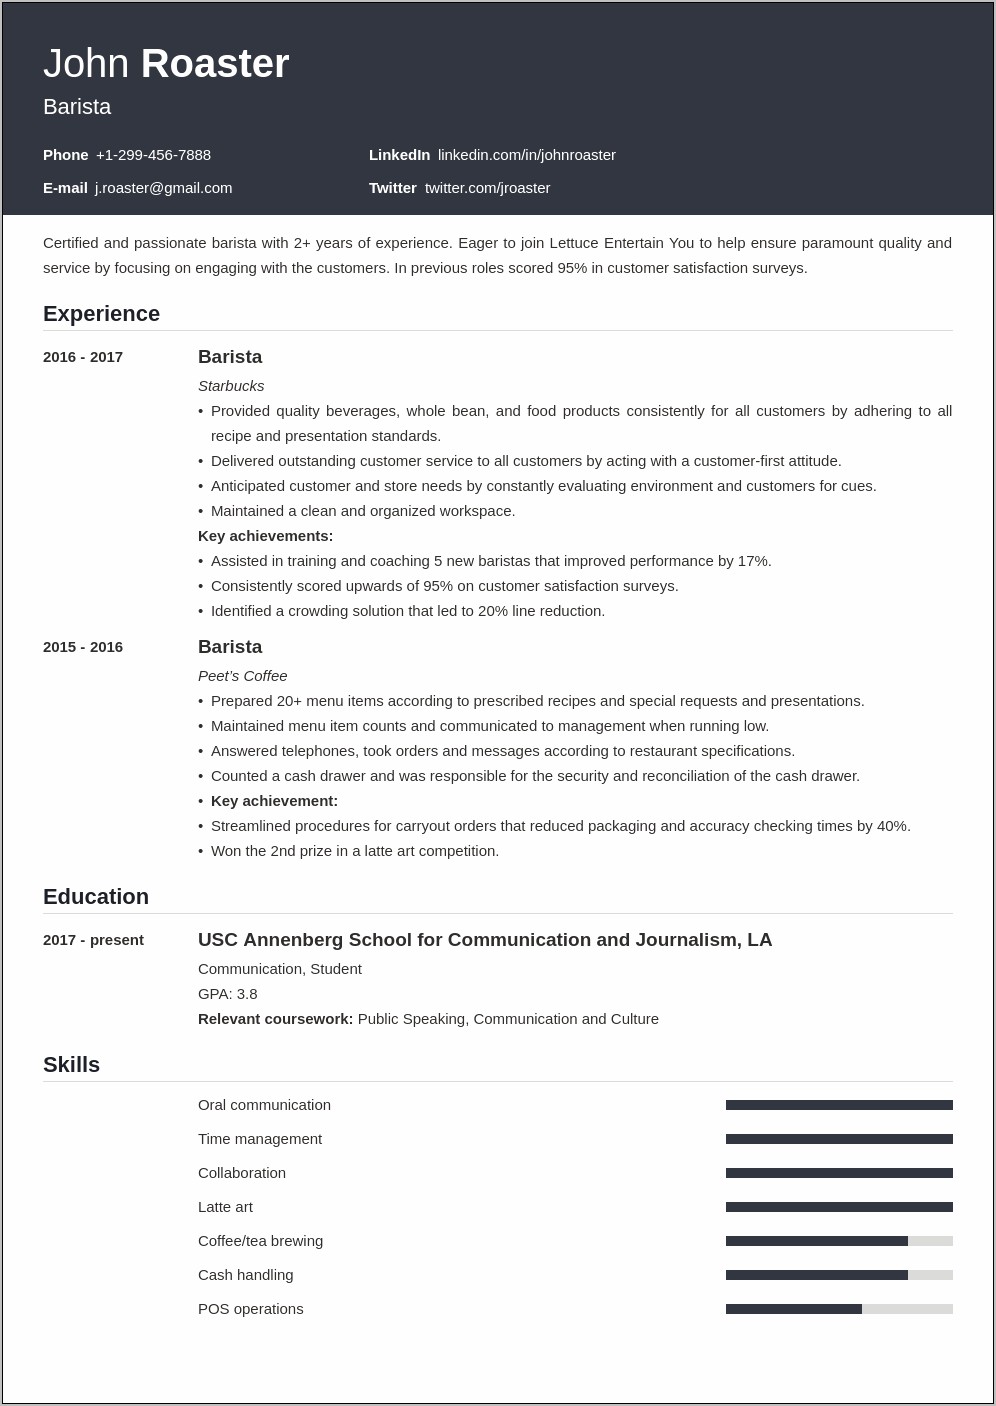 Resume Special Skills And Interests